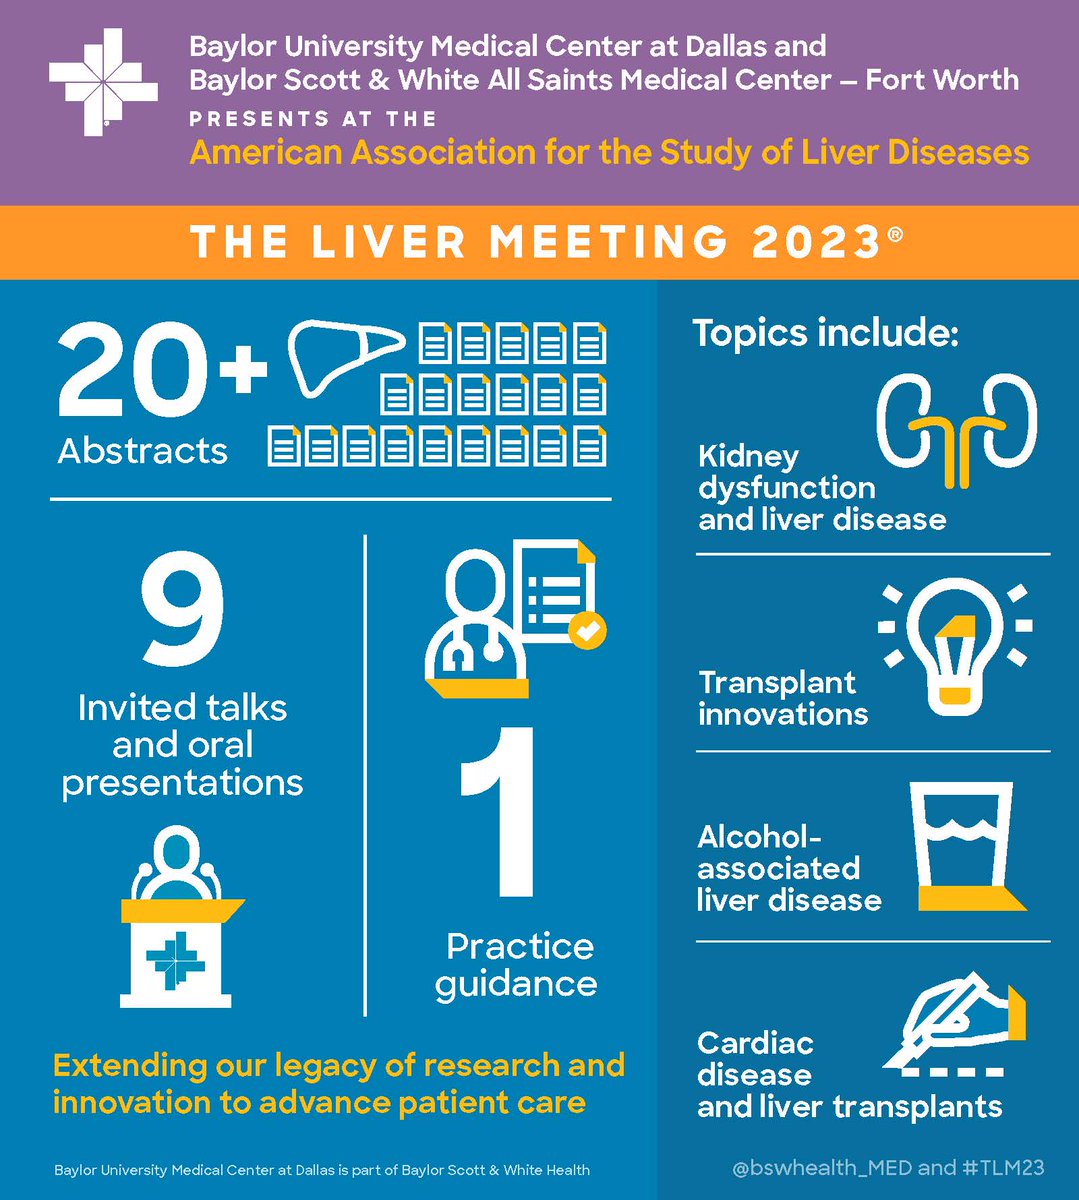 Looking forward to another exciting year at the liver meeting.#TLM23 @anjiwall @AASLDtweets @bswhealth @ShivangMehtaMD @Themis_Kourk news.bswhealth.com/en-US/baylor-s…